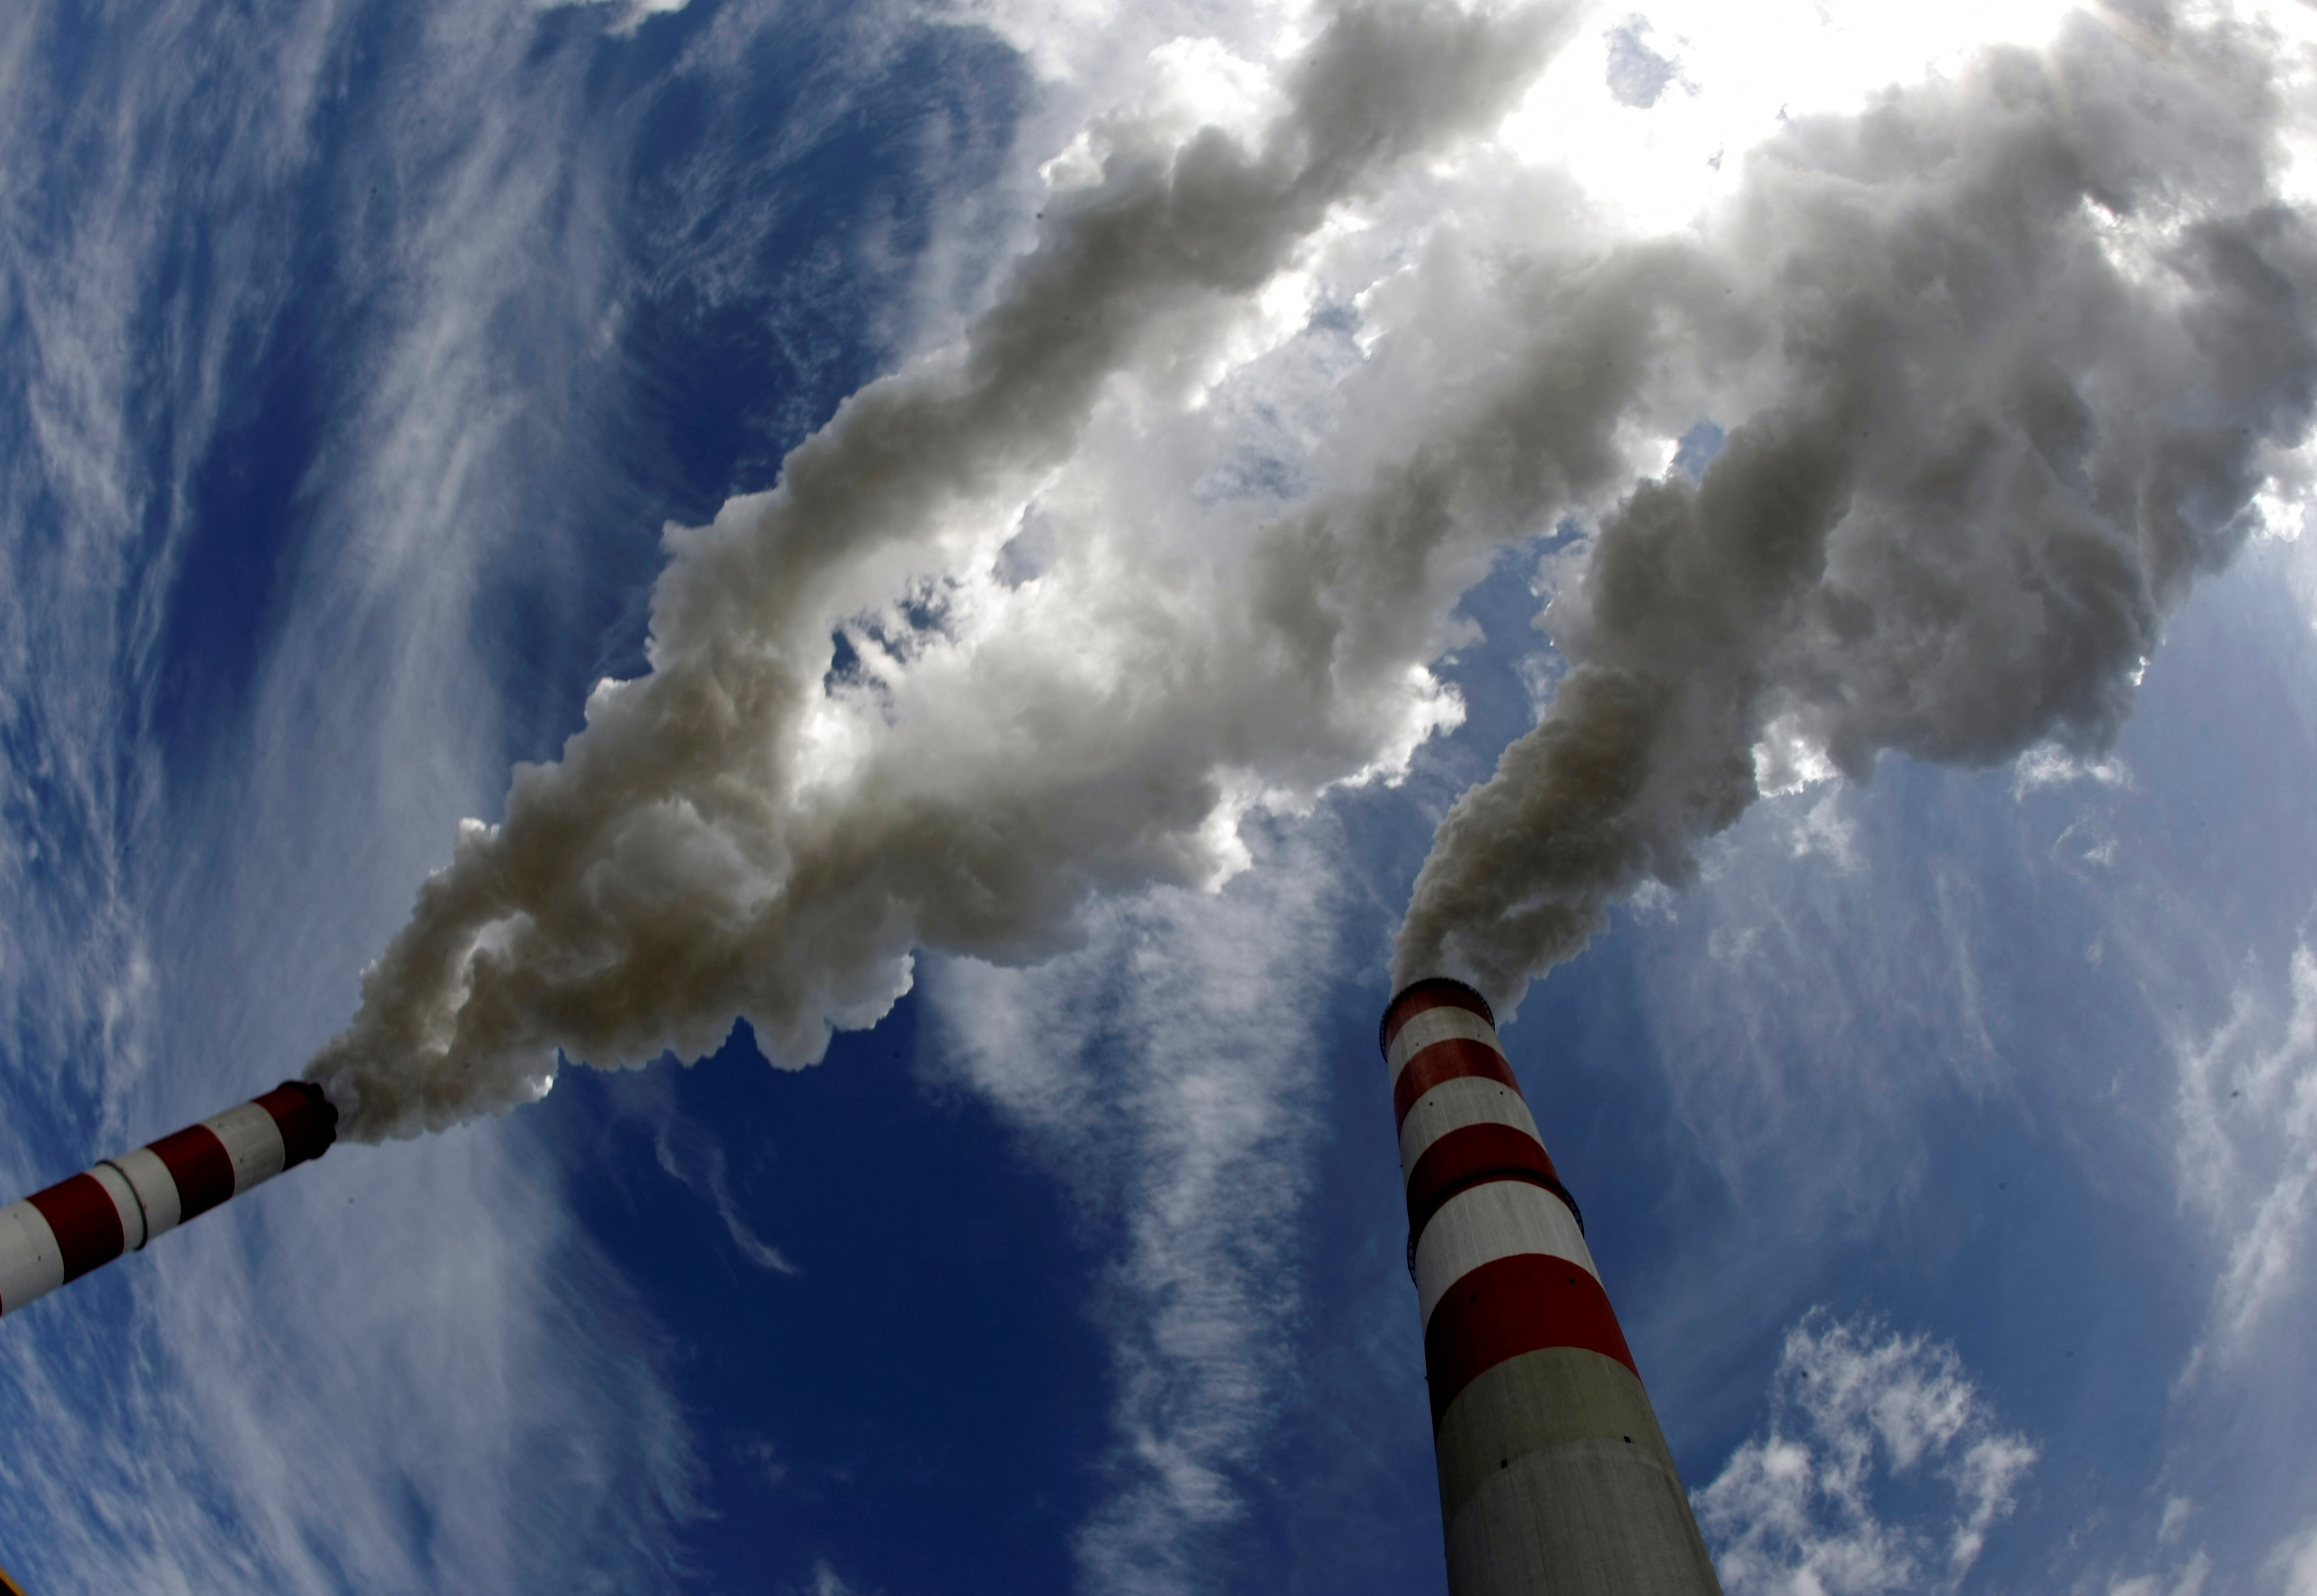 Smoke billows from the chimneys of Belchatow Power Station, Europe's biggest coal-fired power plant, in this May 7, 2009 file photo